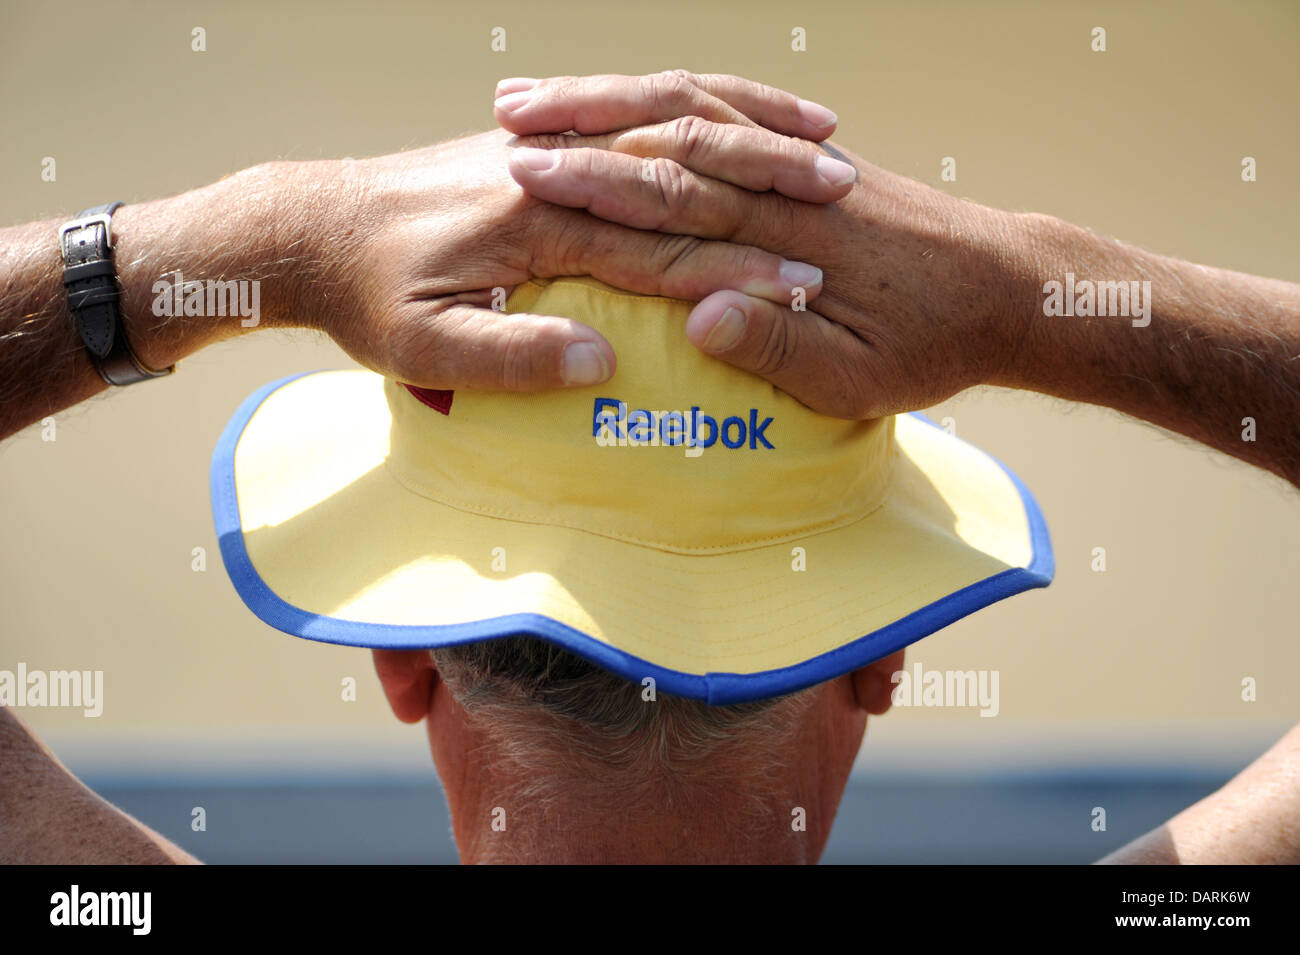 Man wearing Reebok Sports clothing sun hat with hands behind head in hot weather Stock Photo